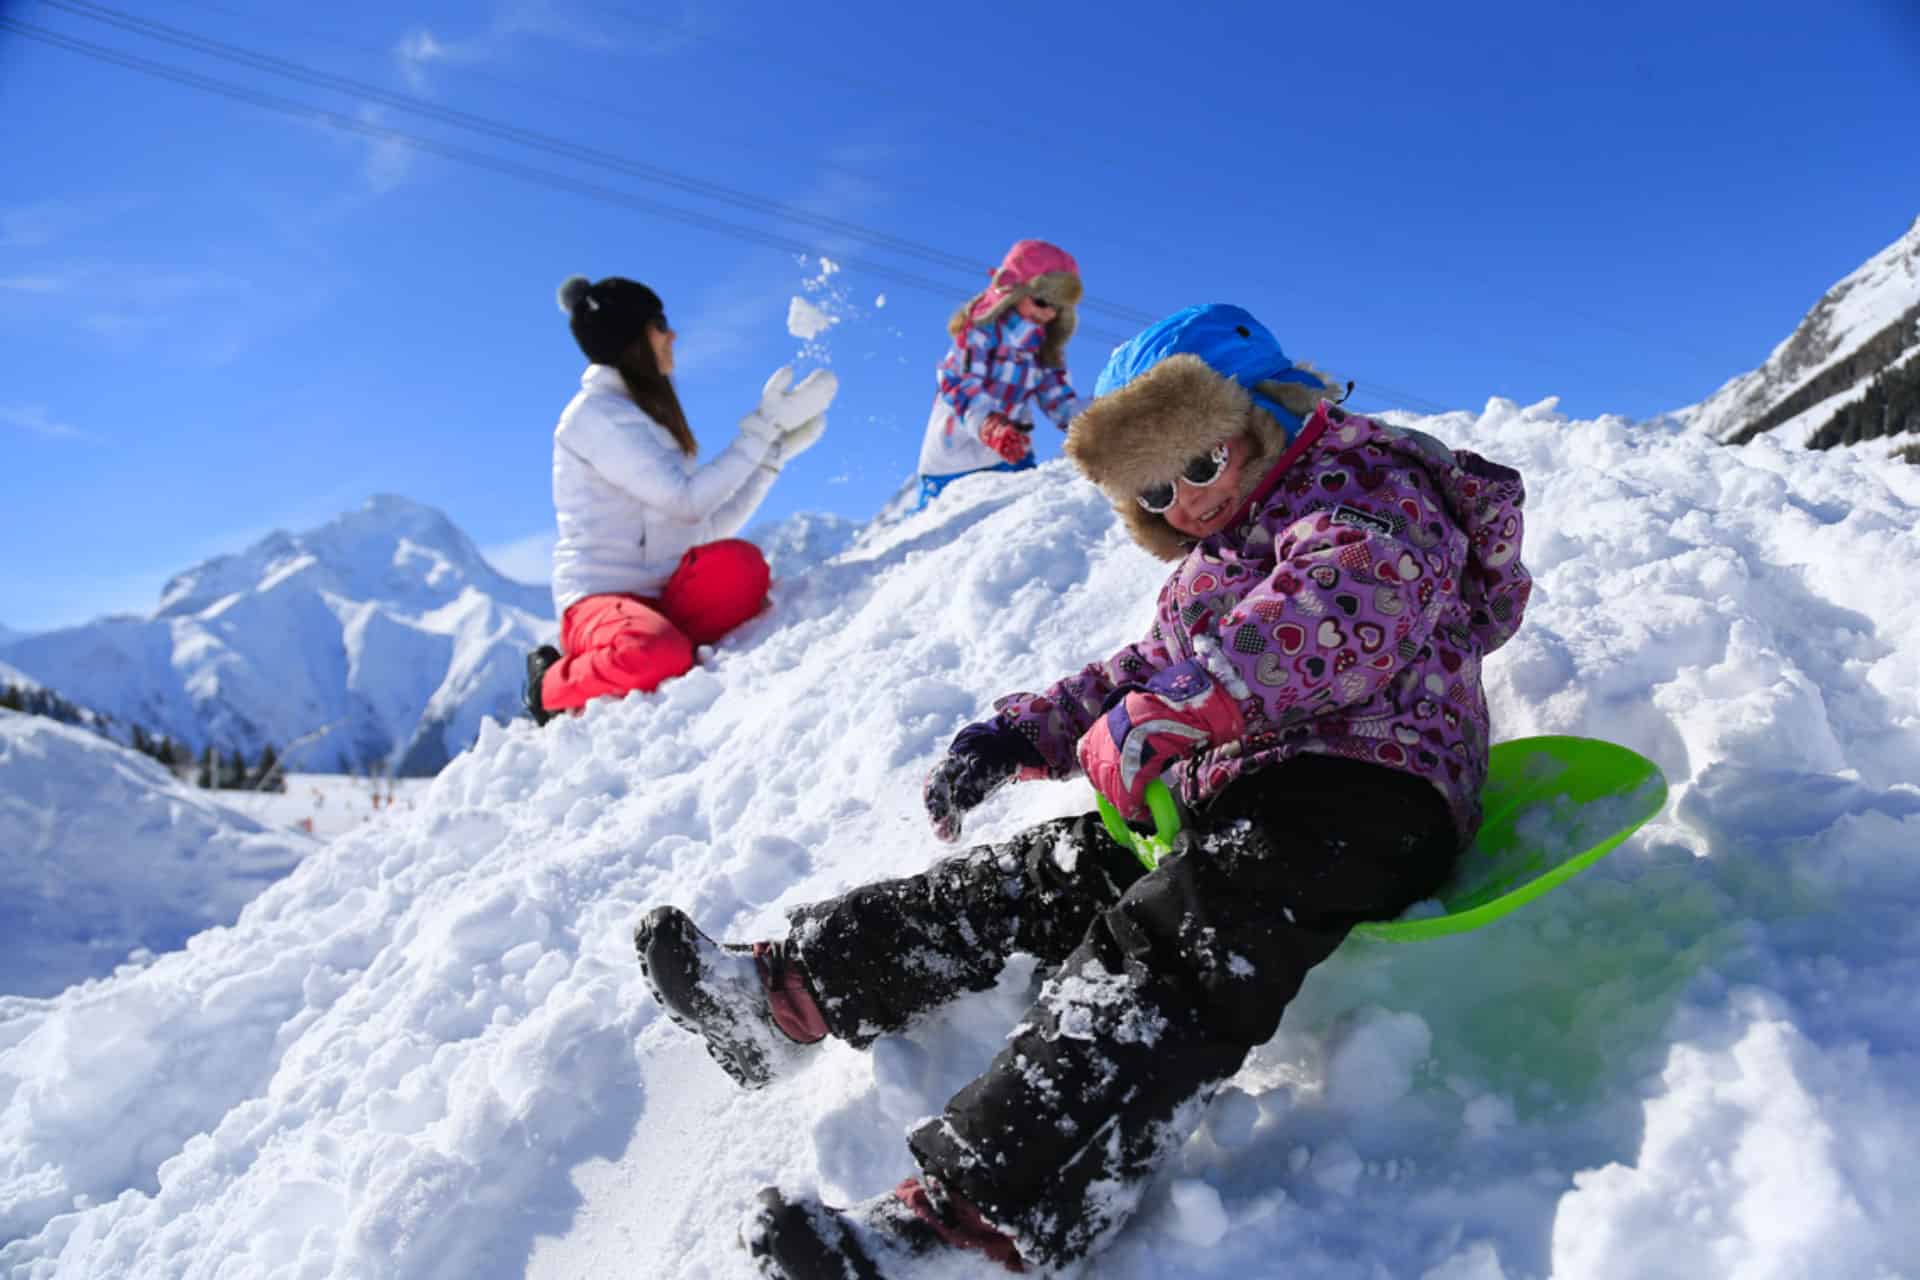 Les Deux Alpes: A High-Altitude Sledding Adventure is one of the most exciting sledging winter spots in France